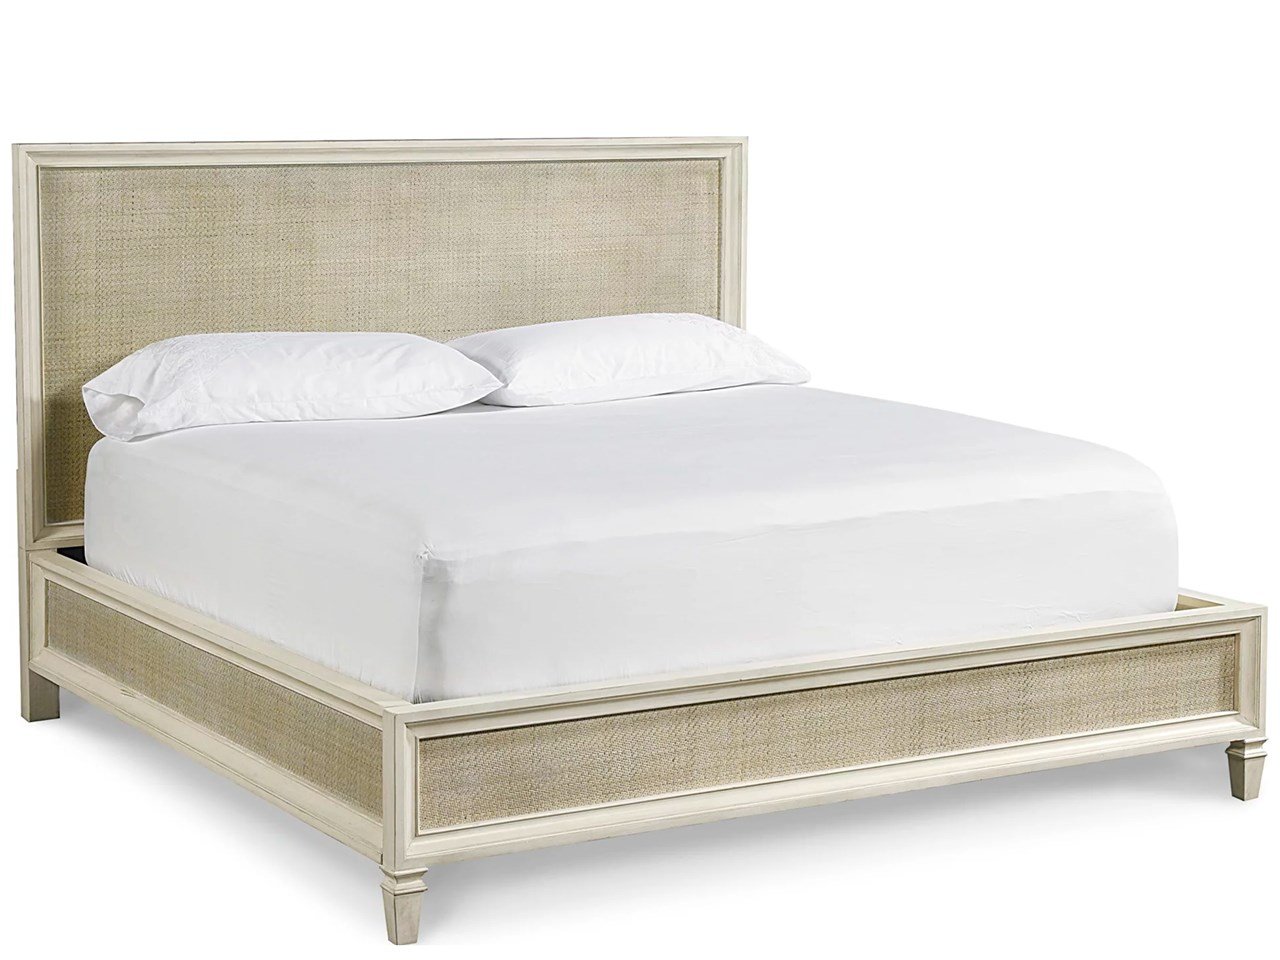 Woven Accent Queen Bed